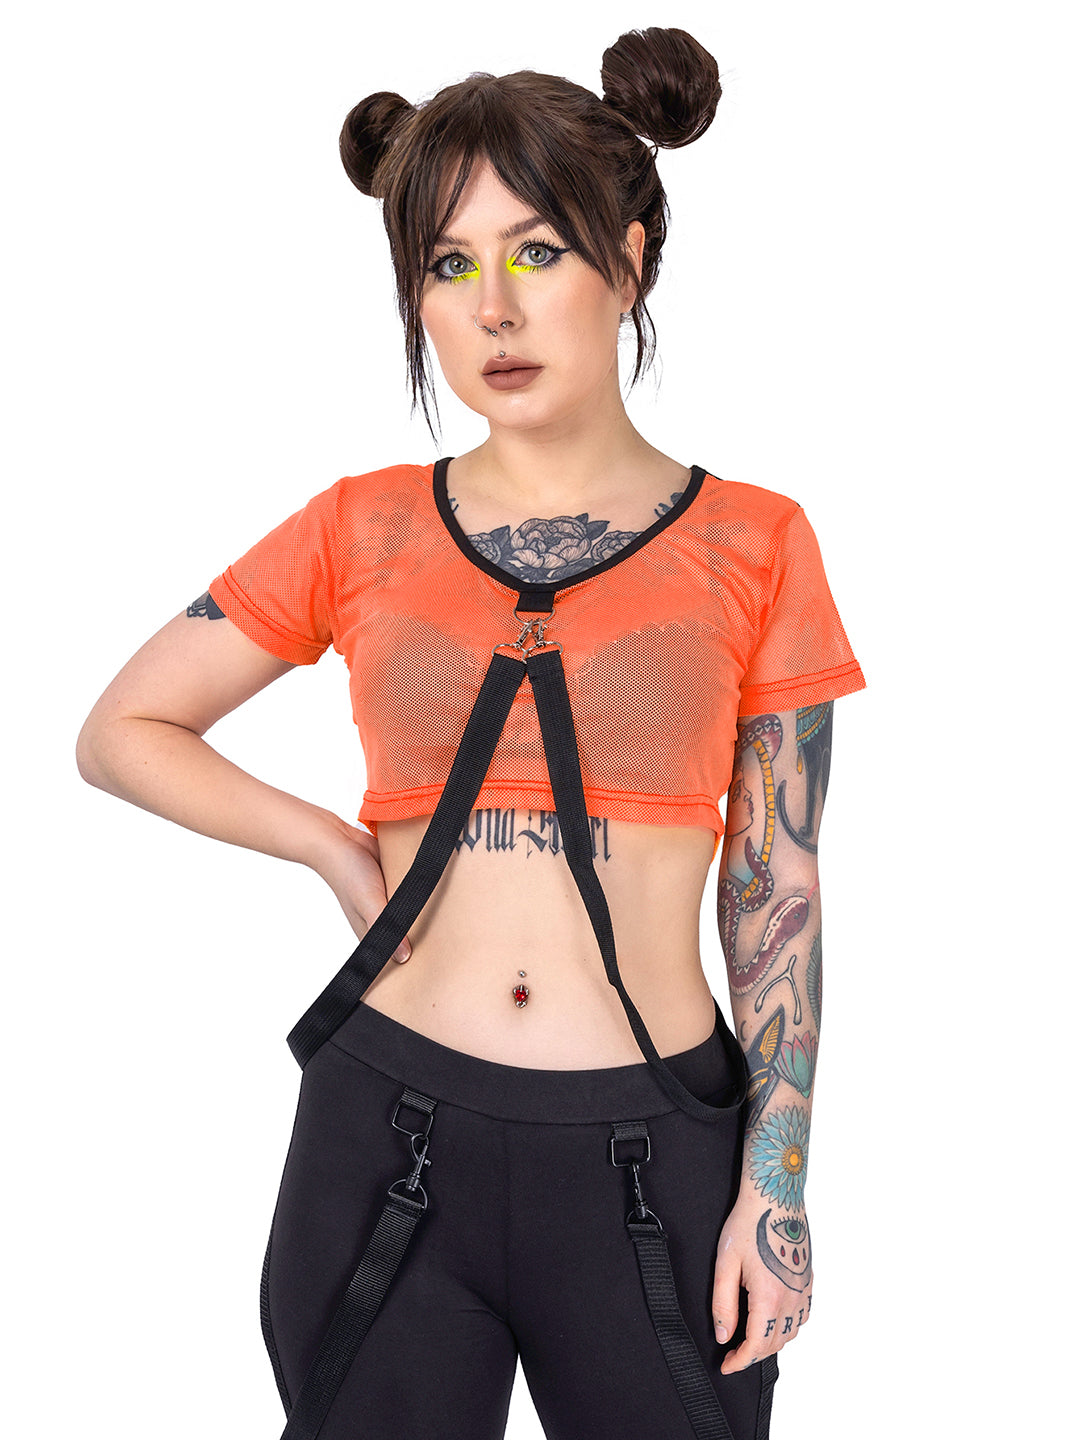 Prevail Fishnet Cropped Top